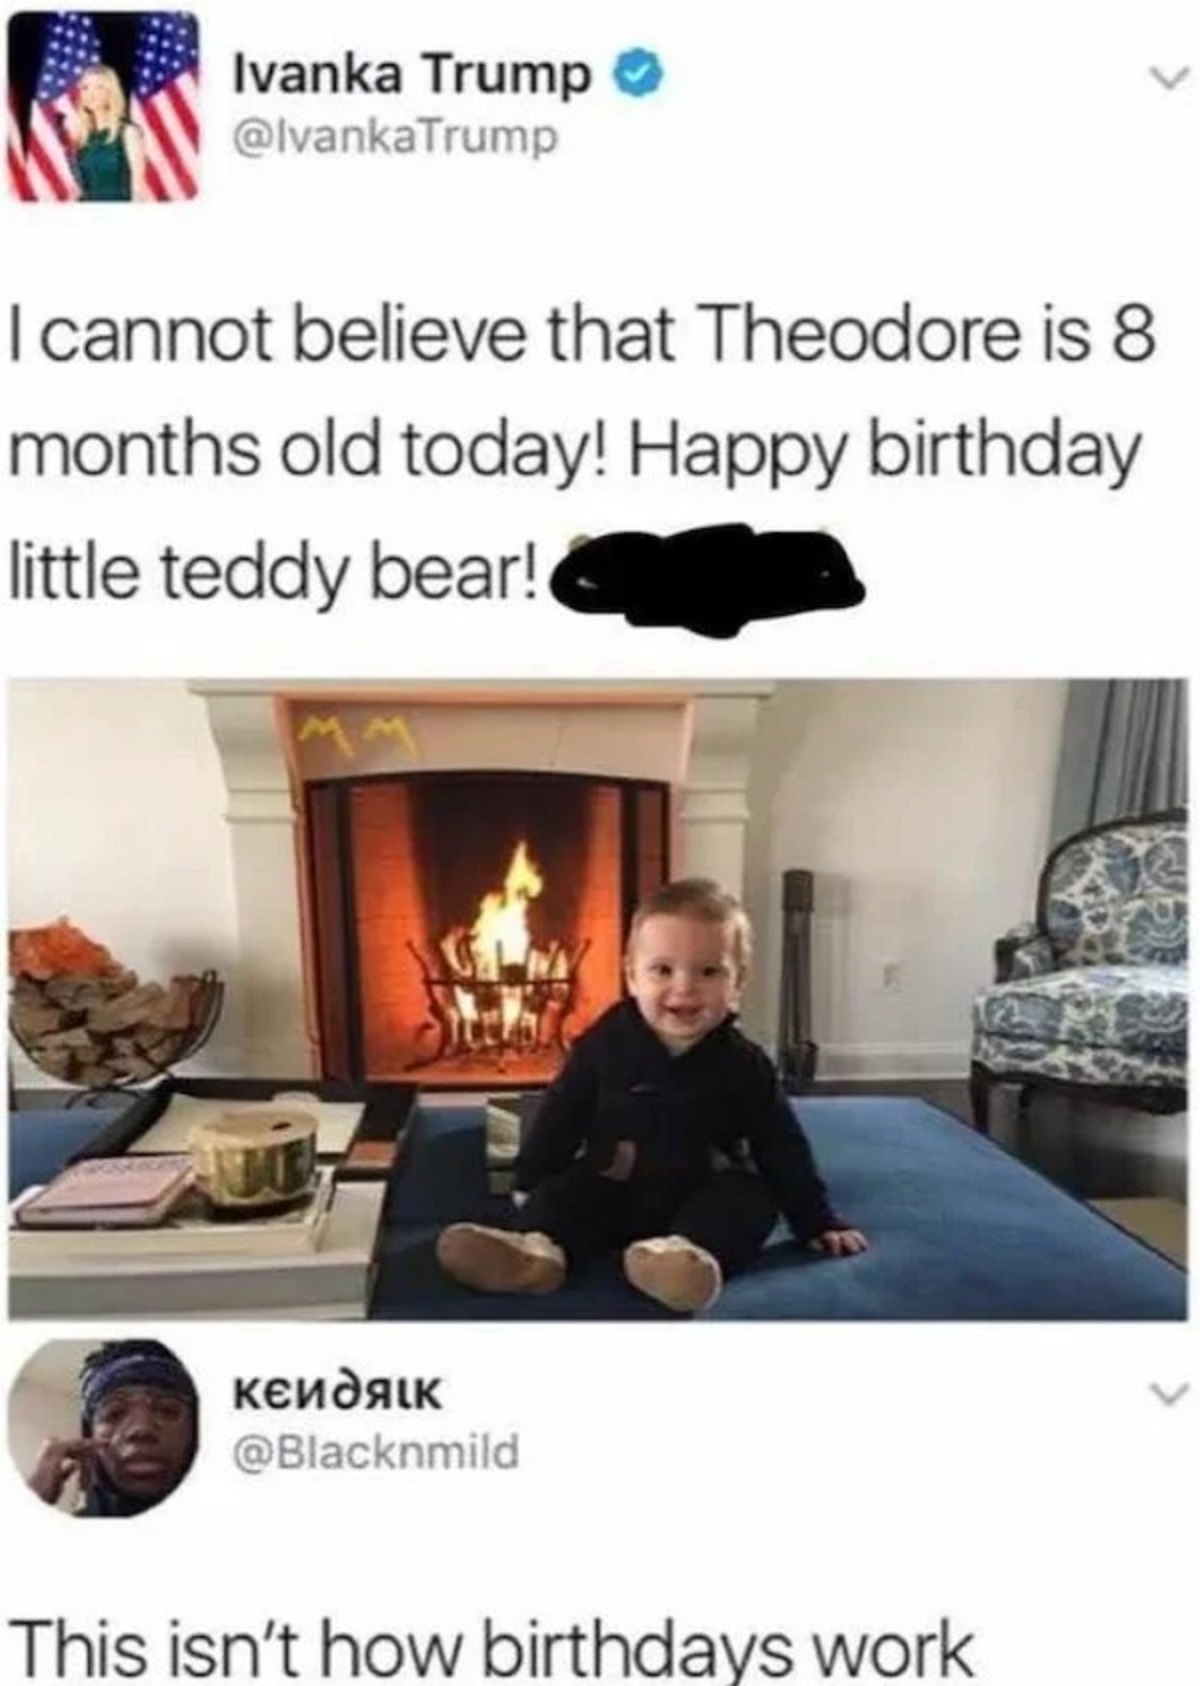 hearth - Ivanka Trump Trump I cannot believe that Theodore is 8 months old today! Happy birthday little teddy bear! This isn't how birthdays work